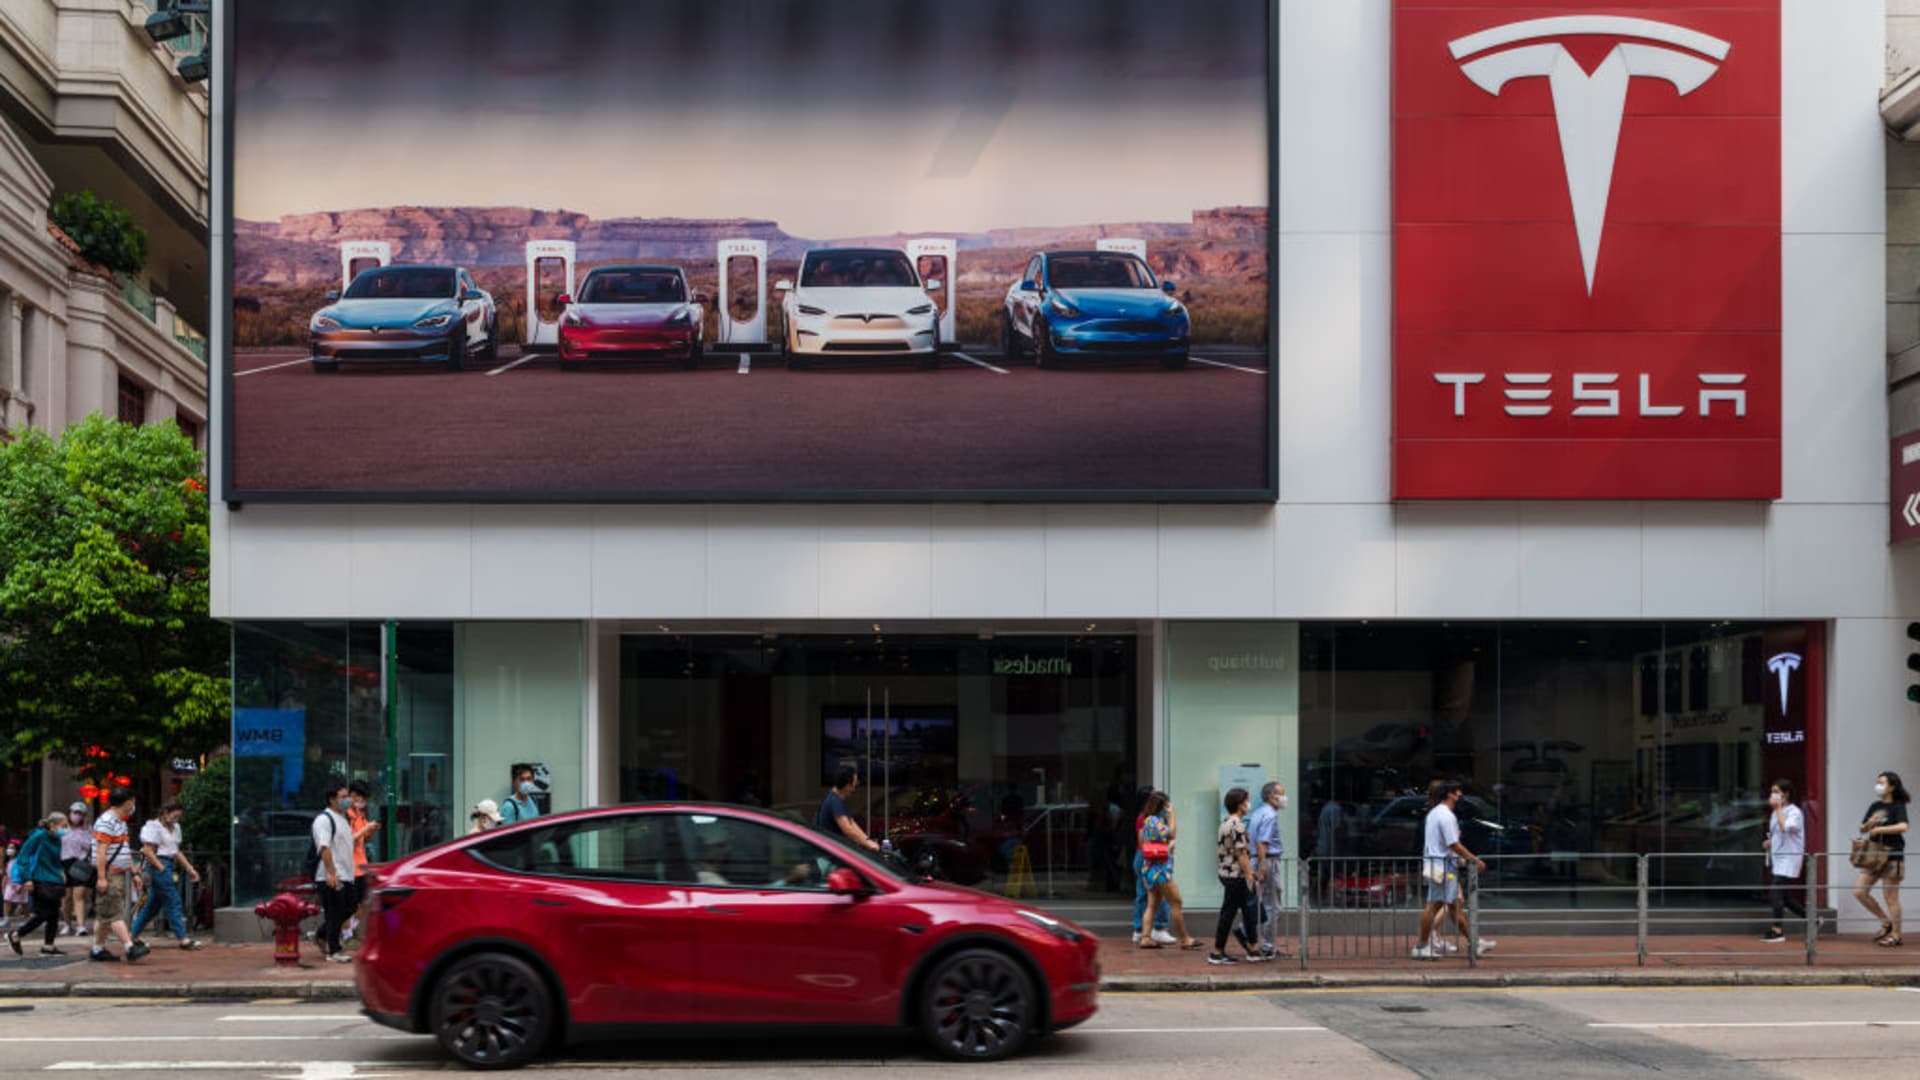 Tesla suppliers’ shares jump as electric automaker cuts prices for some models in China Auto Recent